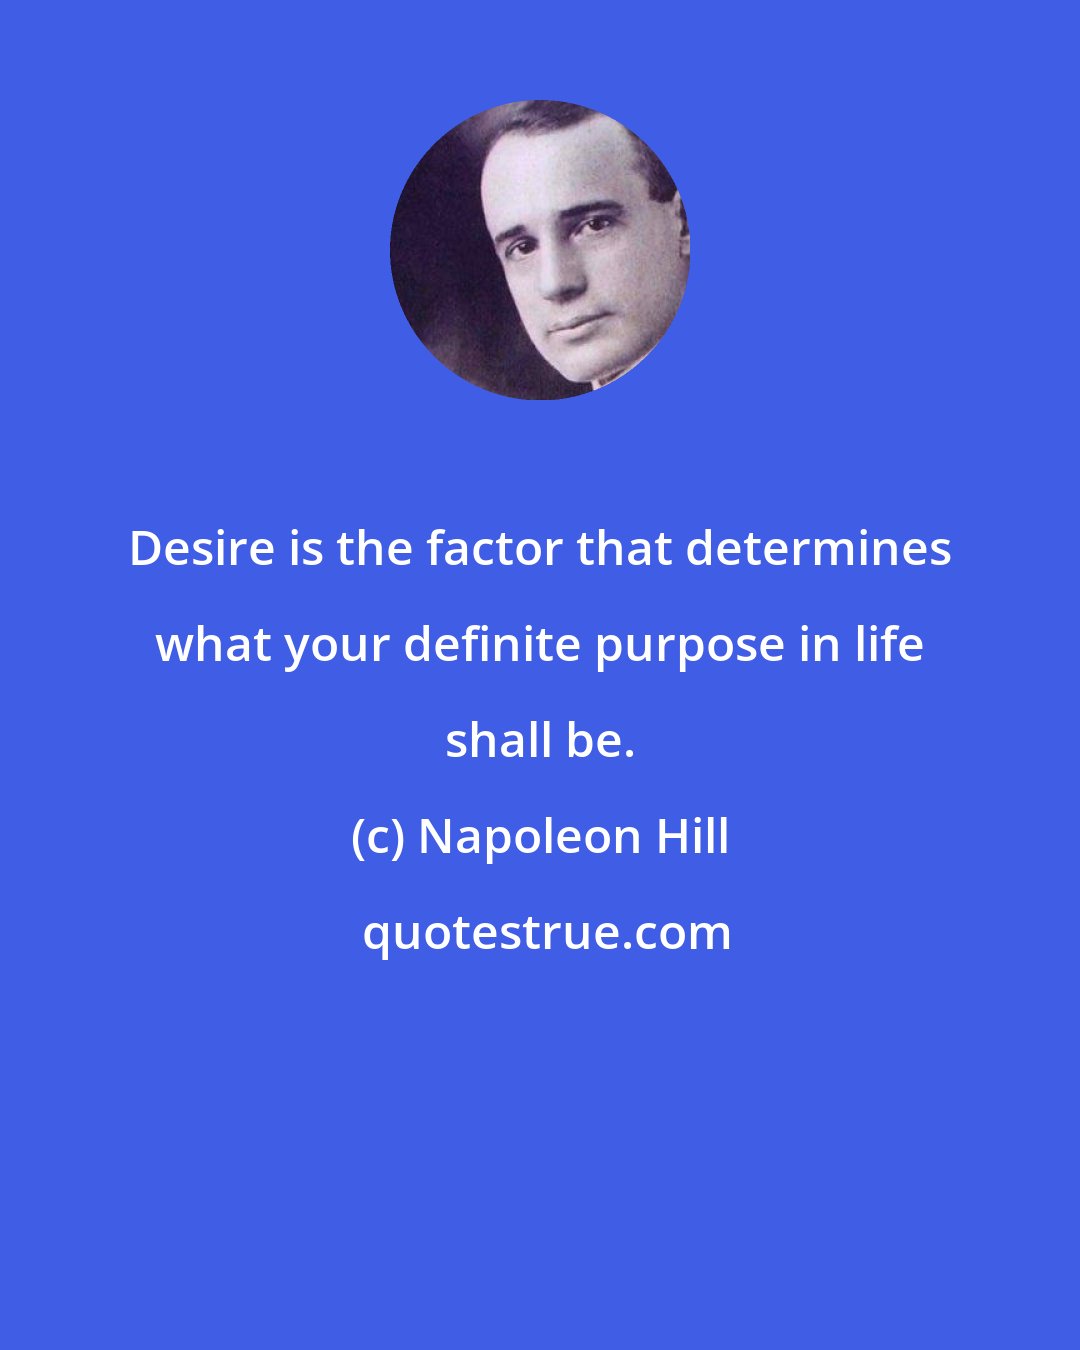 Napoleon Hill: Desire is the factor that determines what your definite purpose in life shall be.